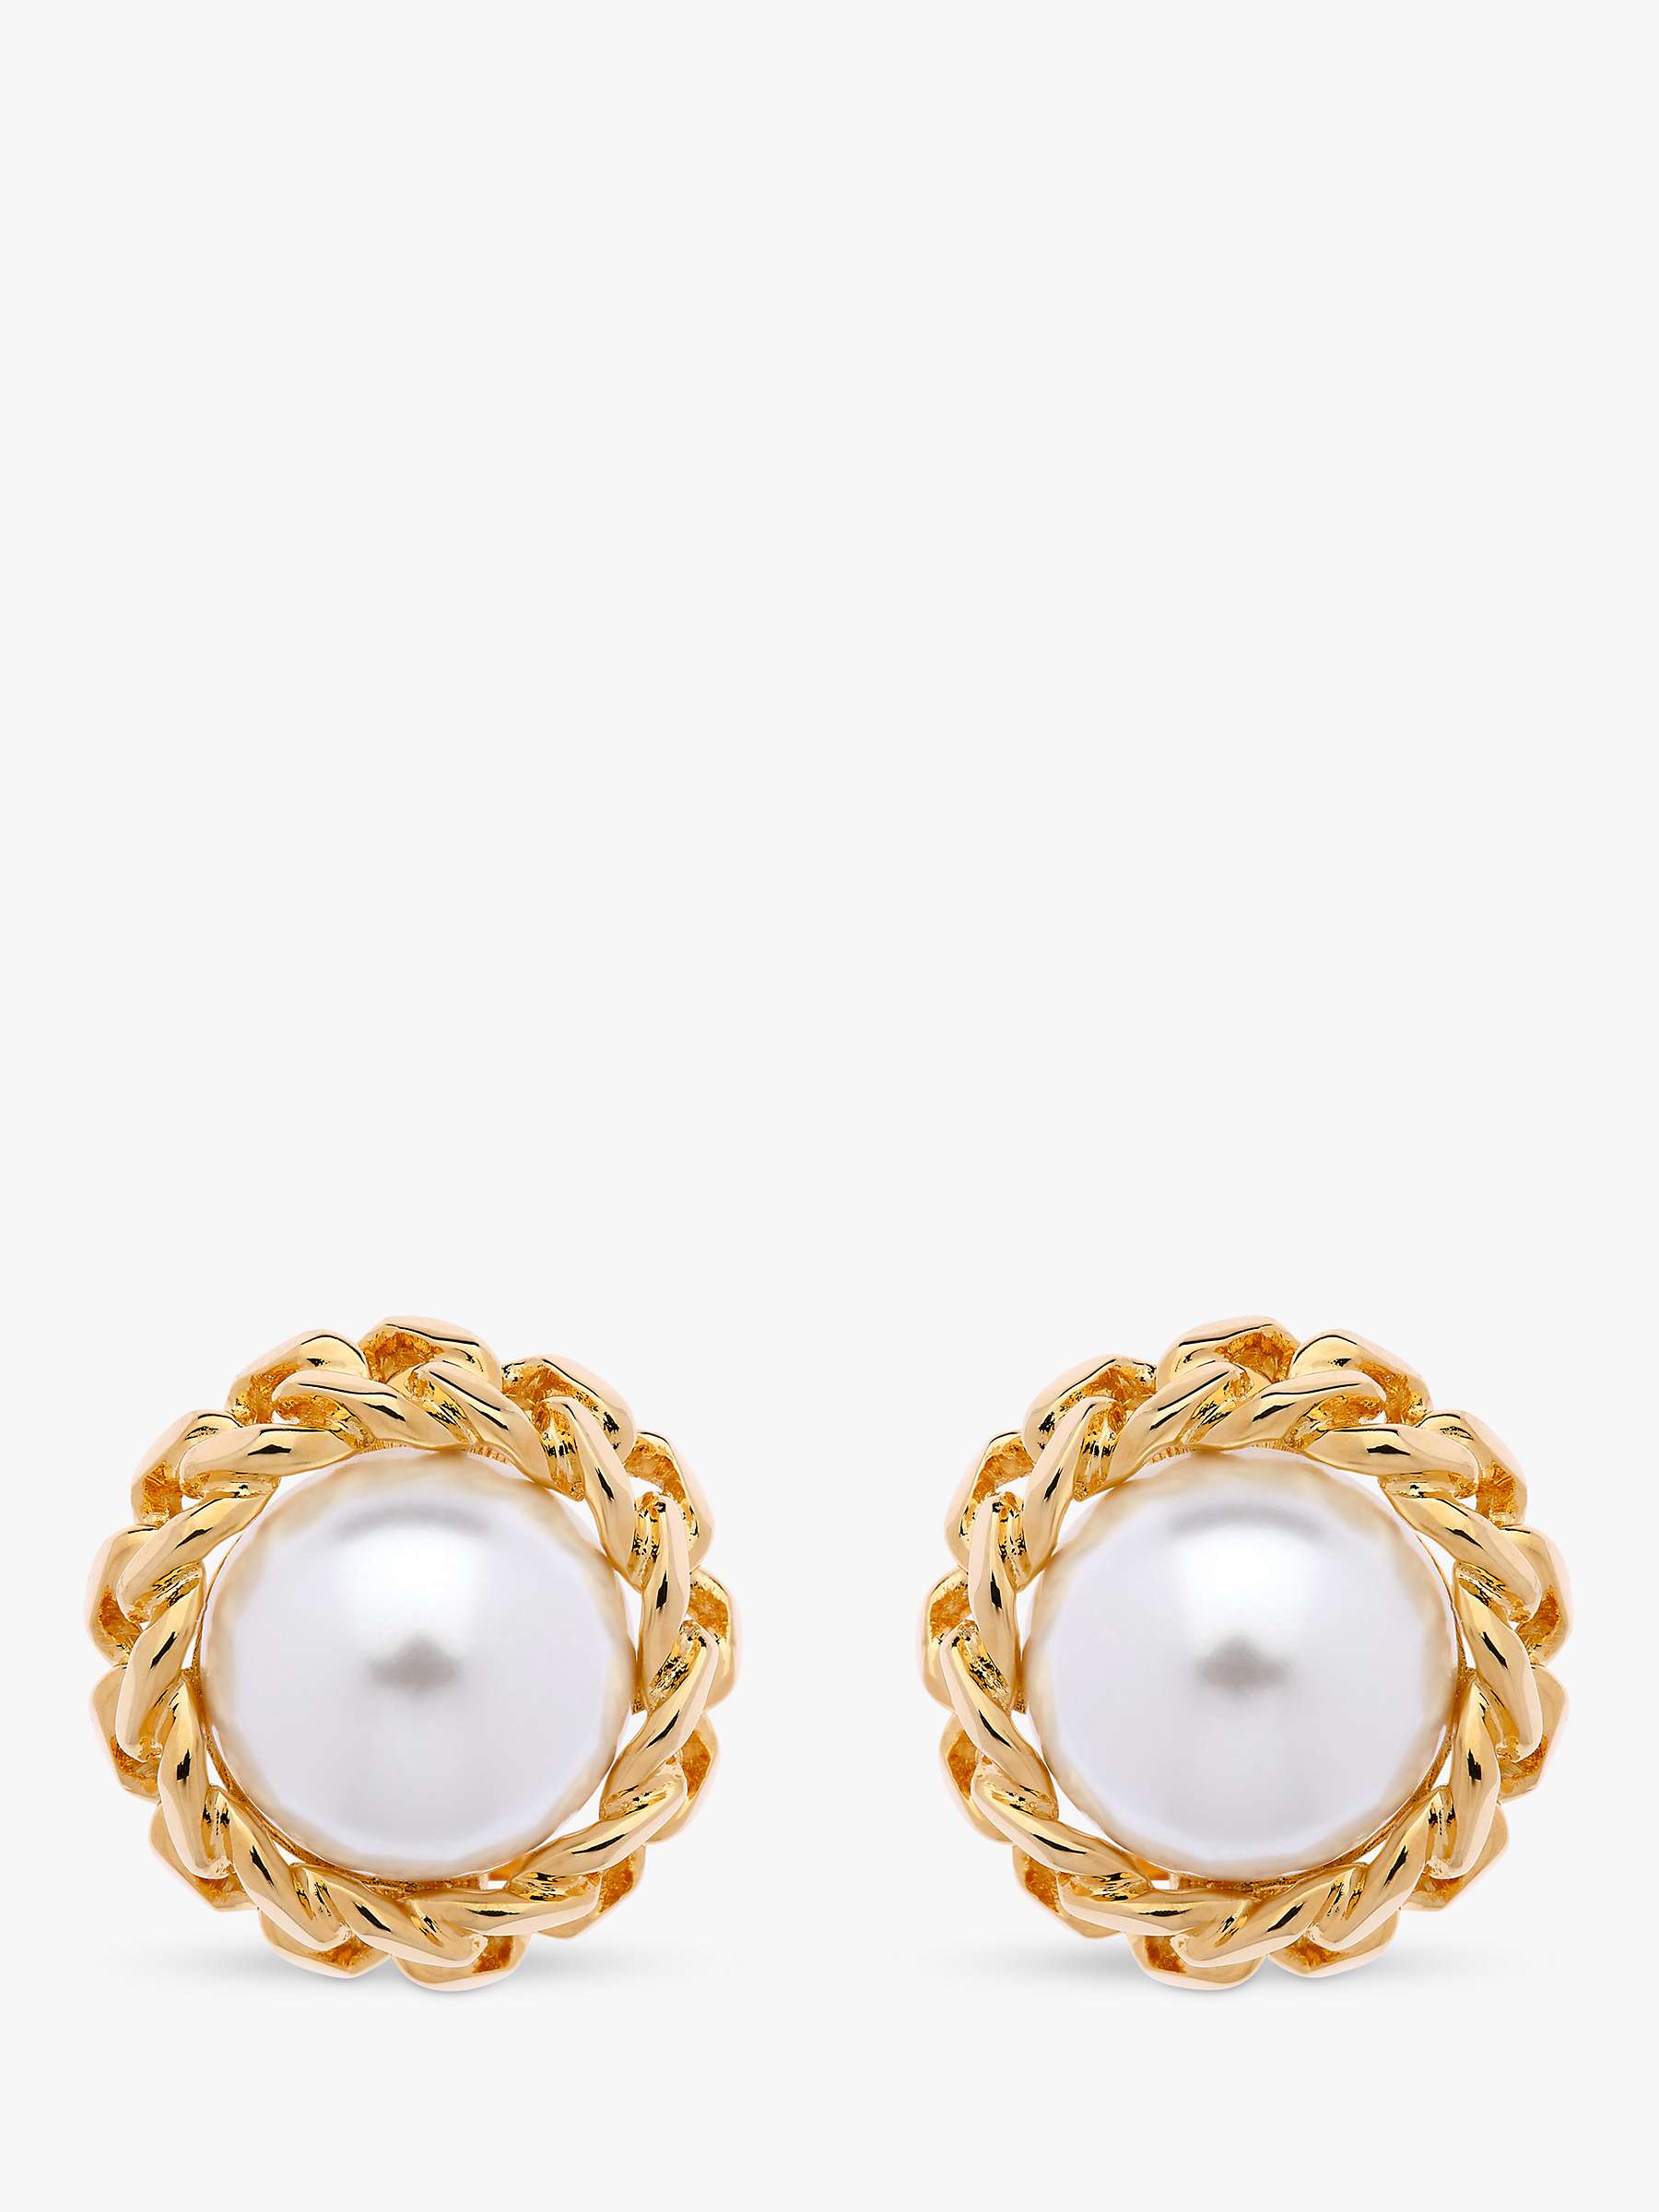 Buy Emma Holland Faux Pearl Round Clip-On Earrings, Gold/White Online at johnlewis.com